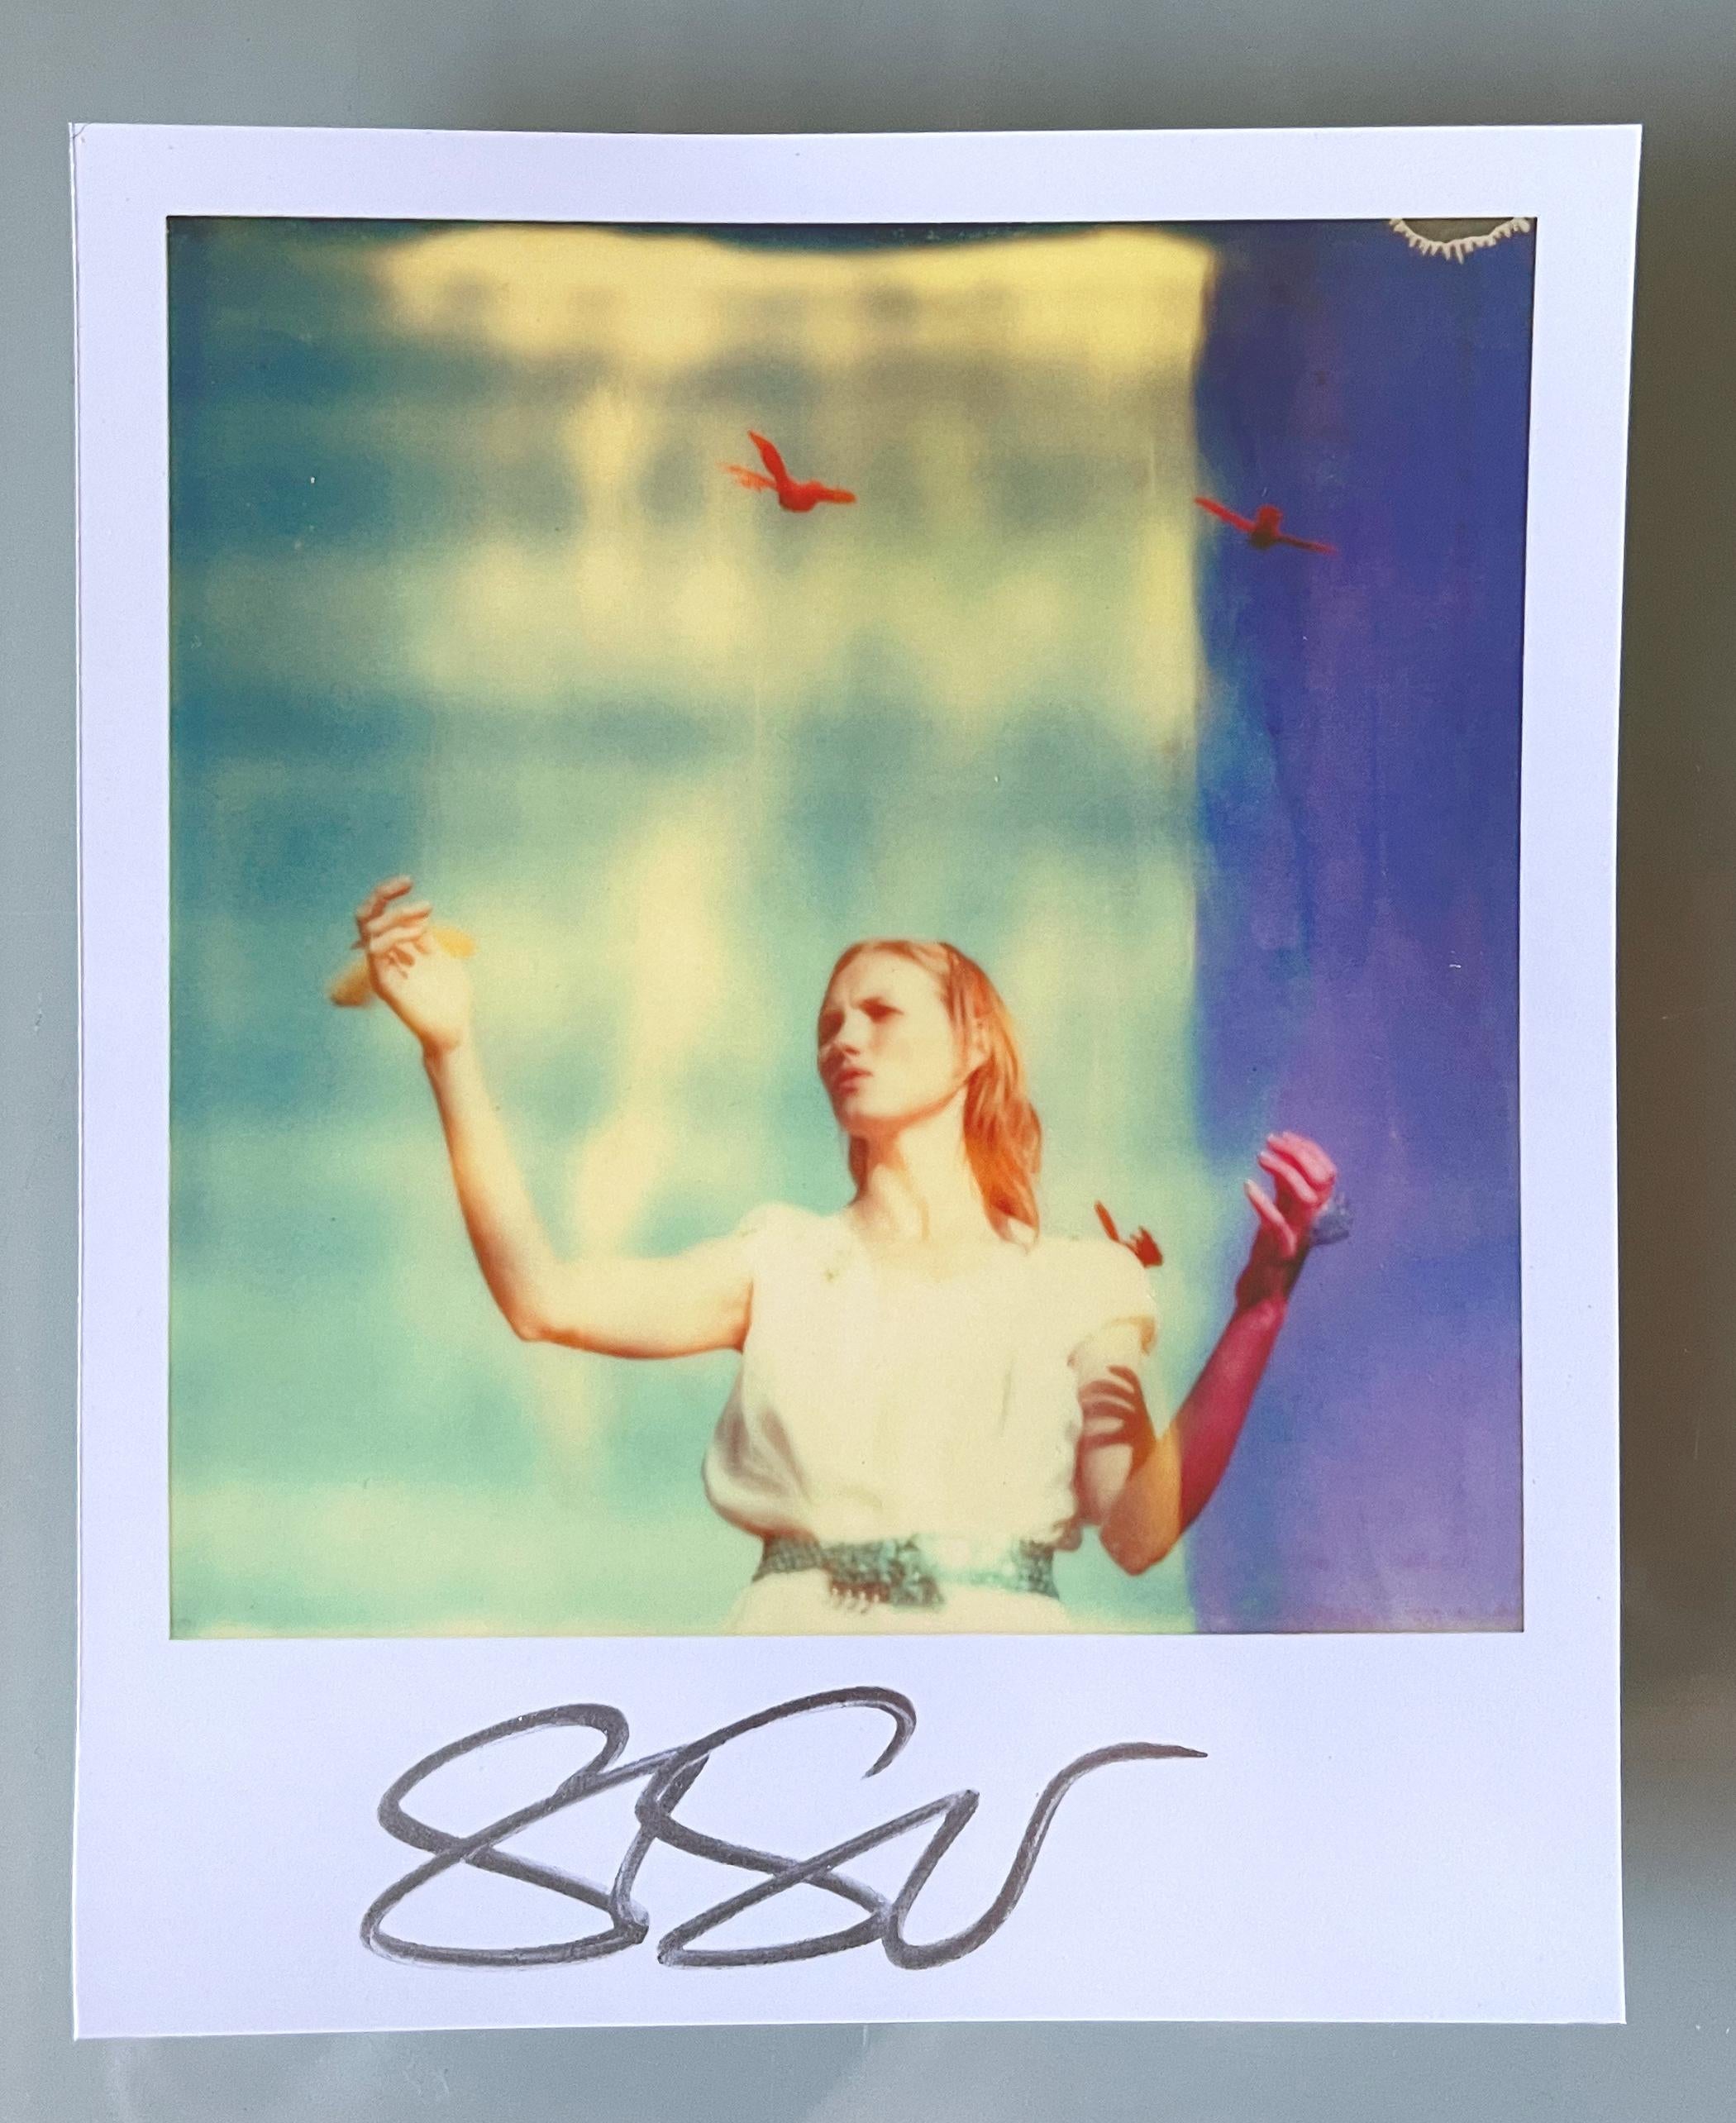 Stefanie Schneider Polaroid sized unlimited Mini 'Haley and the Birds' - 2013 - 

signed in front, not mounted. 
1 Digital Color Photographs based on a Polaroid. 

Polaroid sized open Editions 1999-2016
10.7 x 8.8cm (Image 7.9x7.7cm) each.

Stefanie